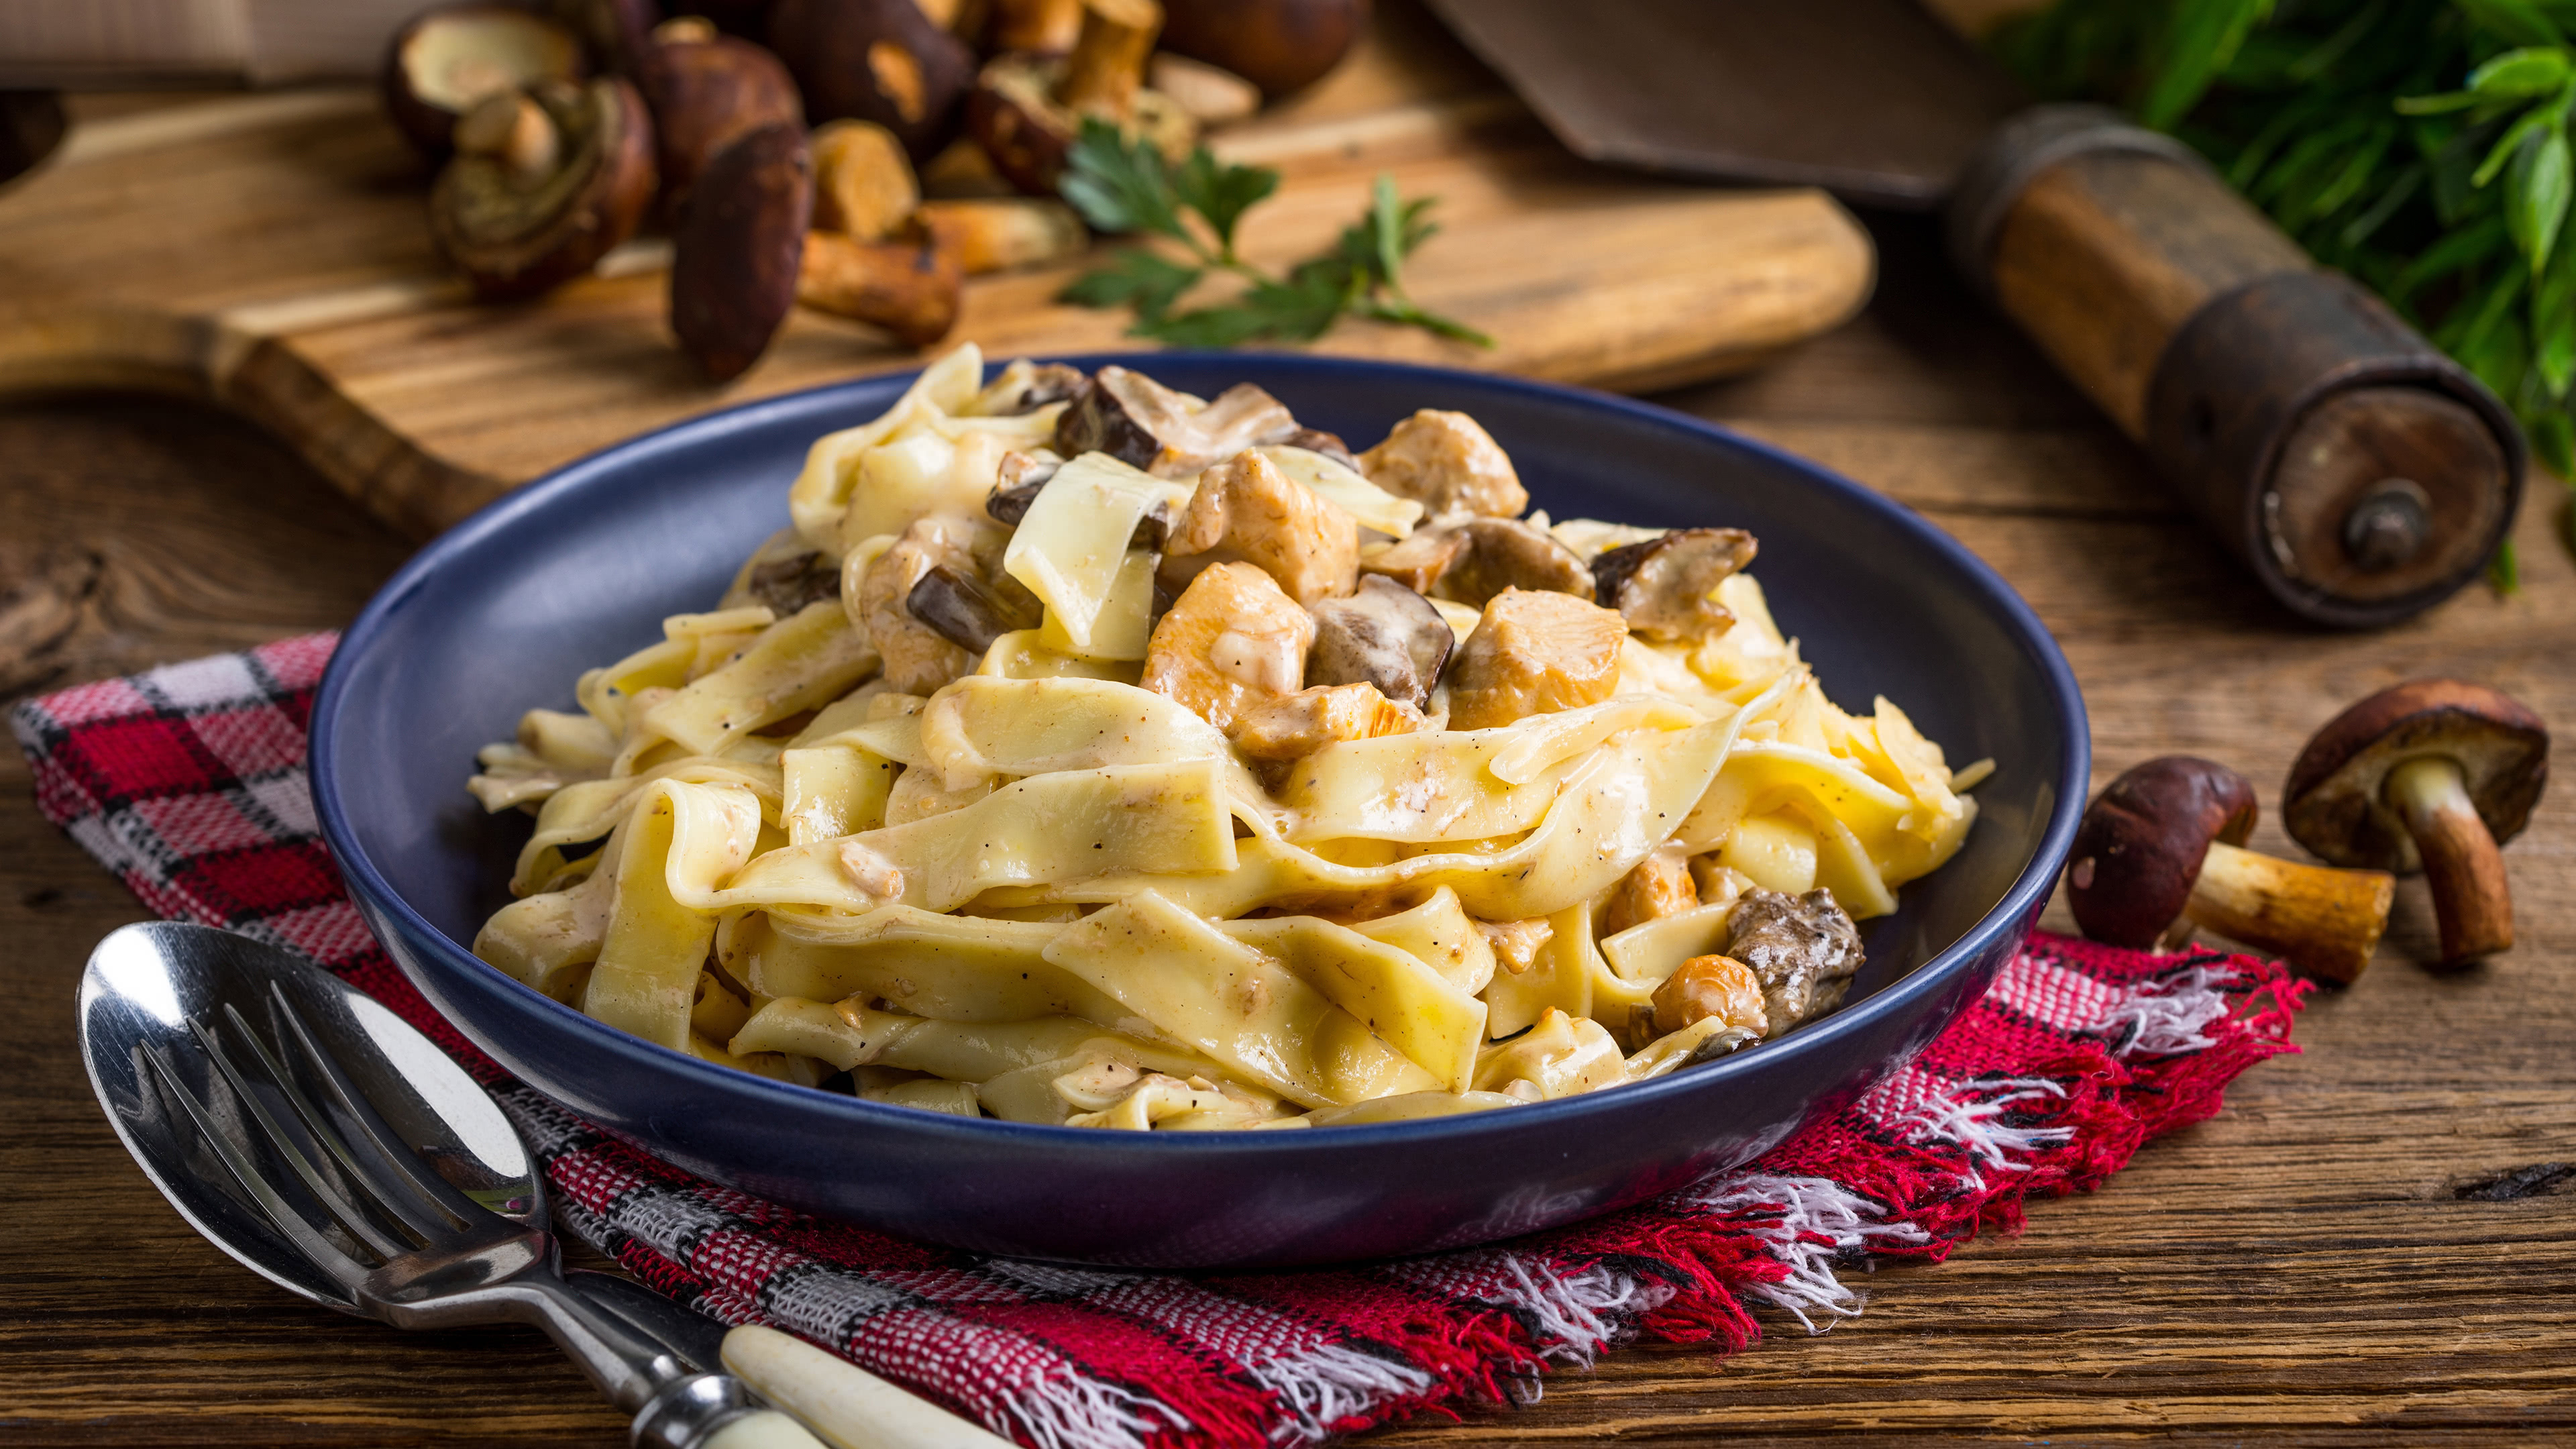 Pasta: Fetuccini Alfredo, Cooked by boiling or baking. 3840x2160 4K Background.